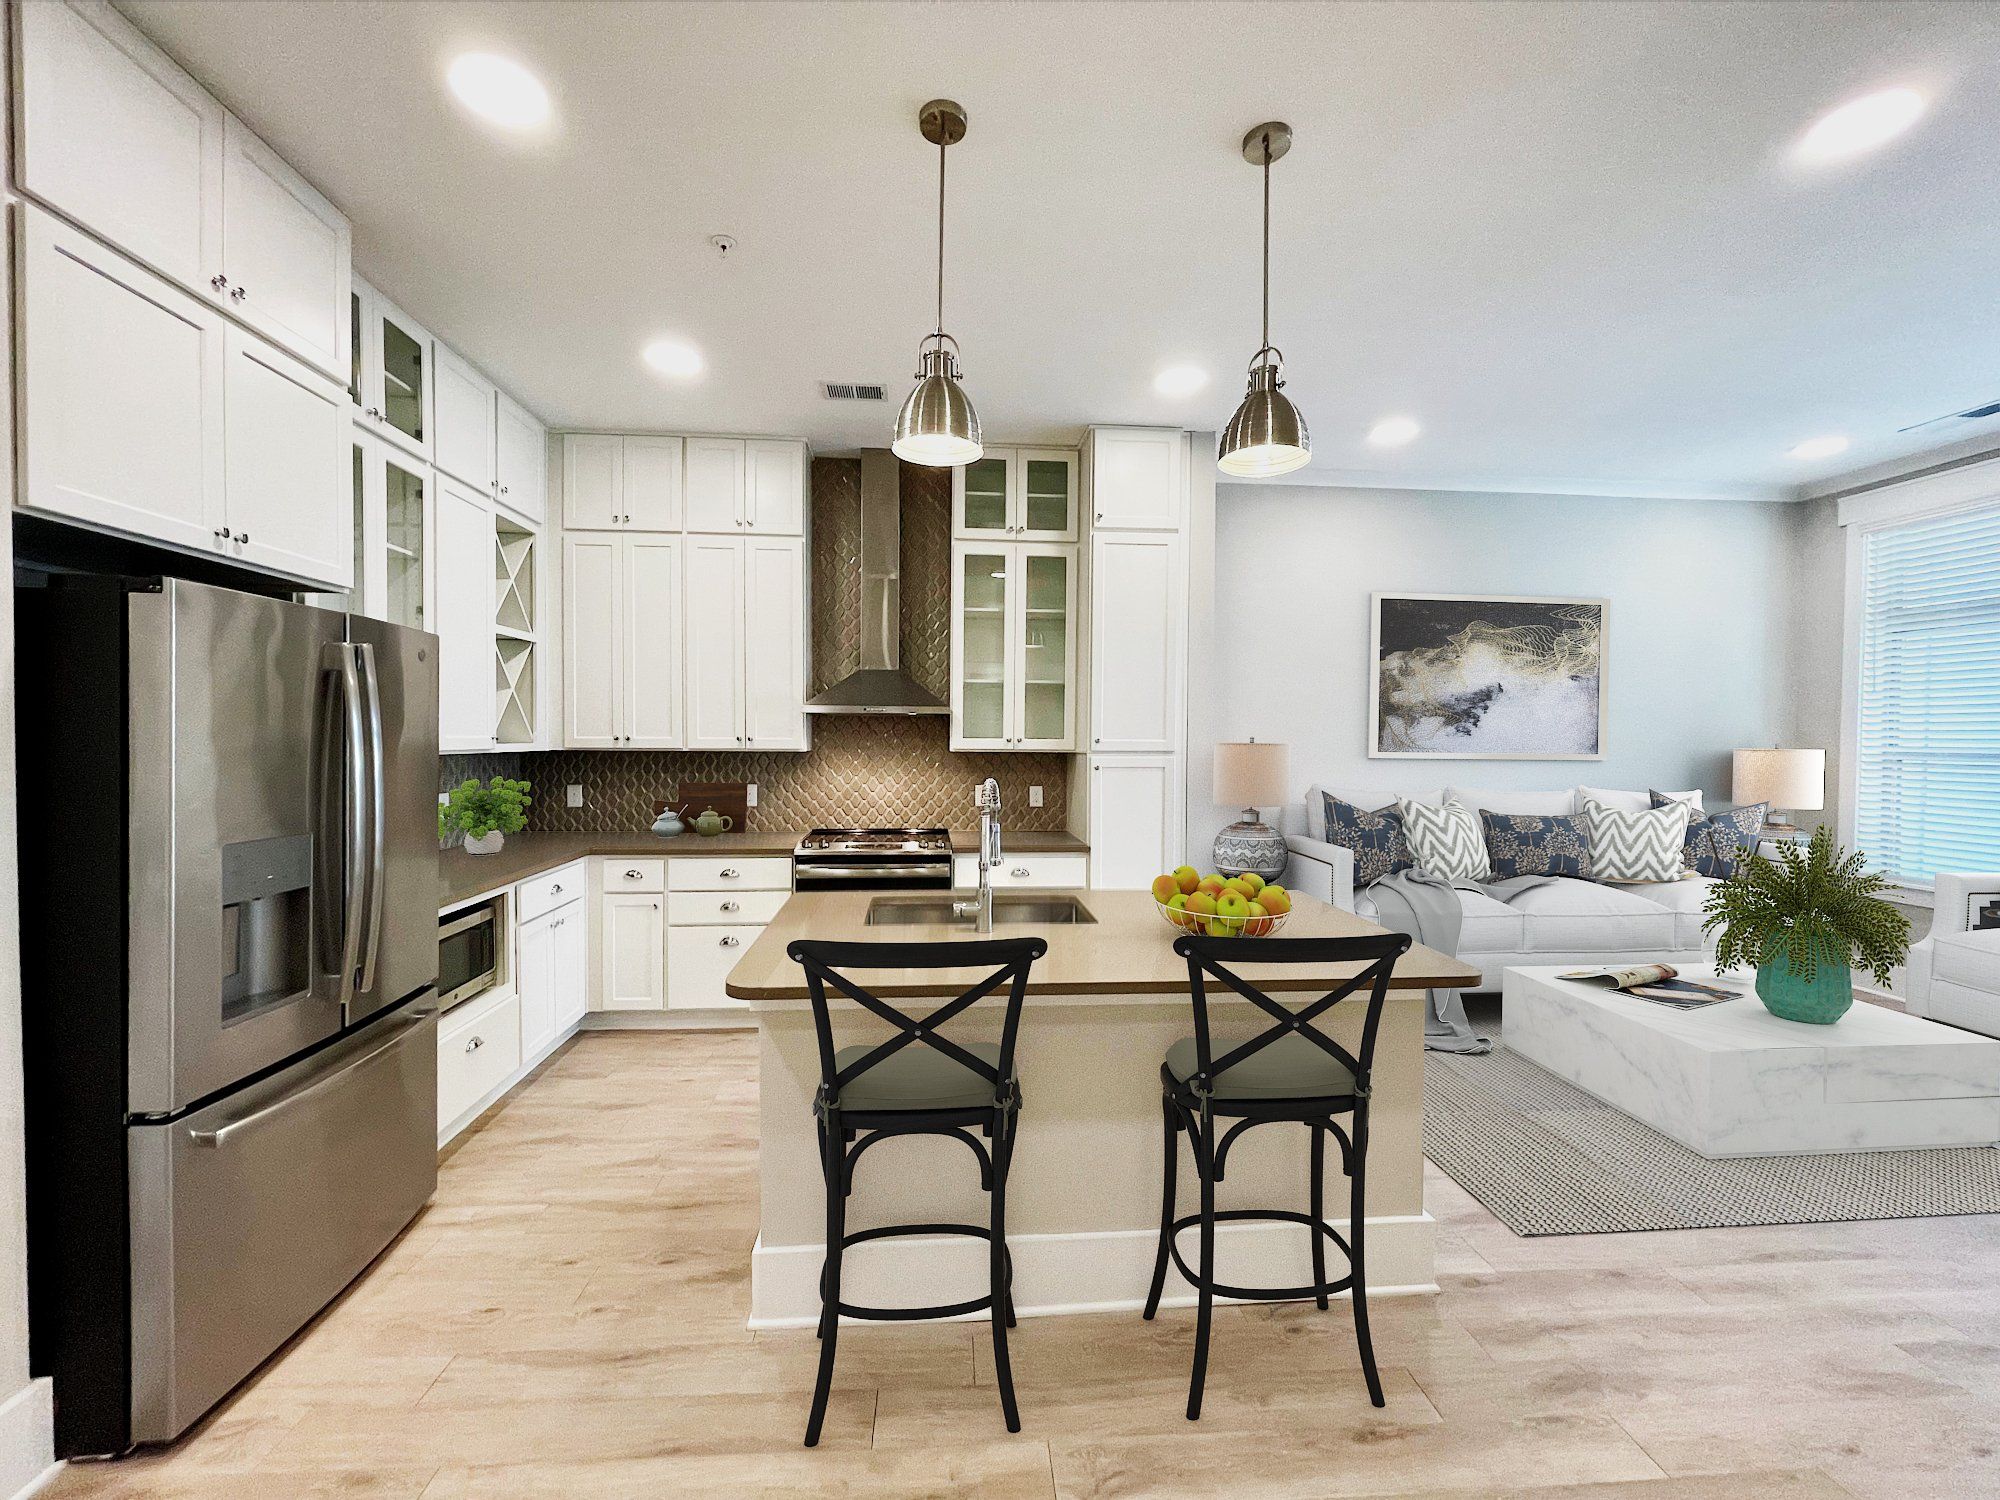 Carraway Village apartments living and dining area in one bedroom apartment with kitchen island, stainless steel appliances, and floor to ceiling cabinetry